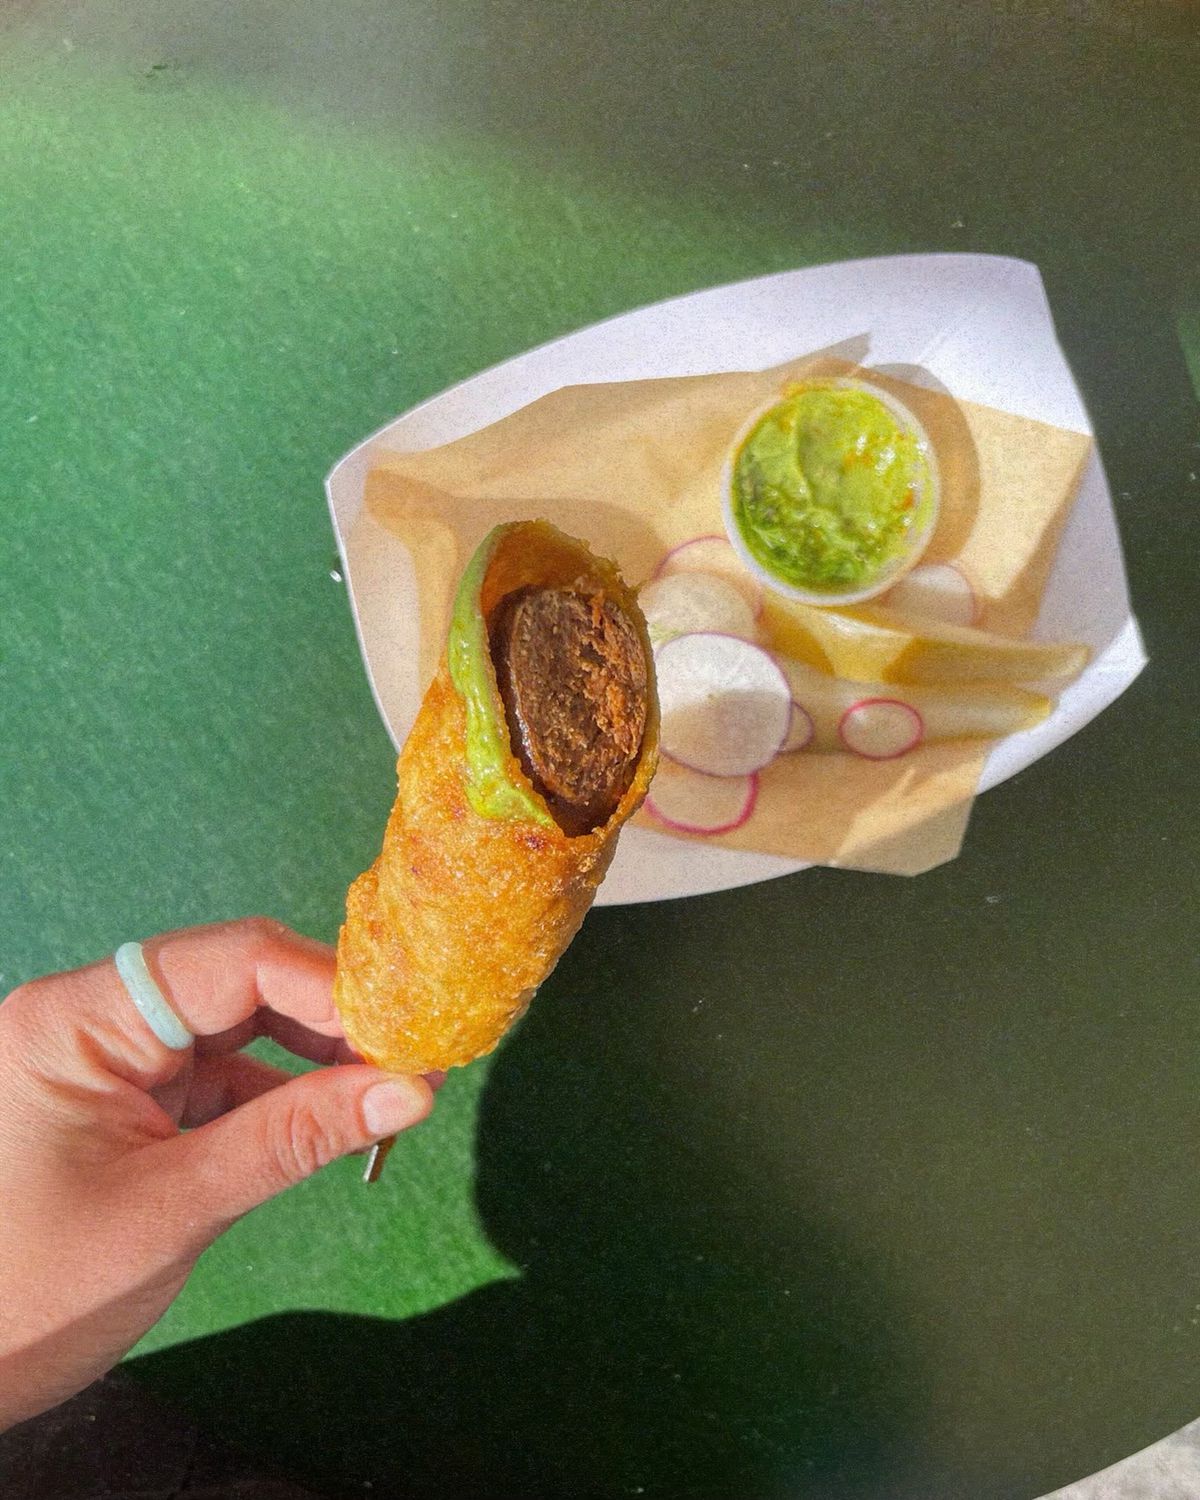 Corn dog held by a hand.